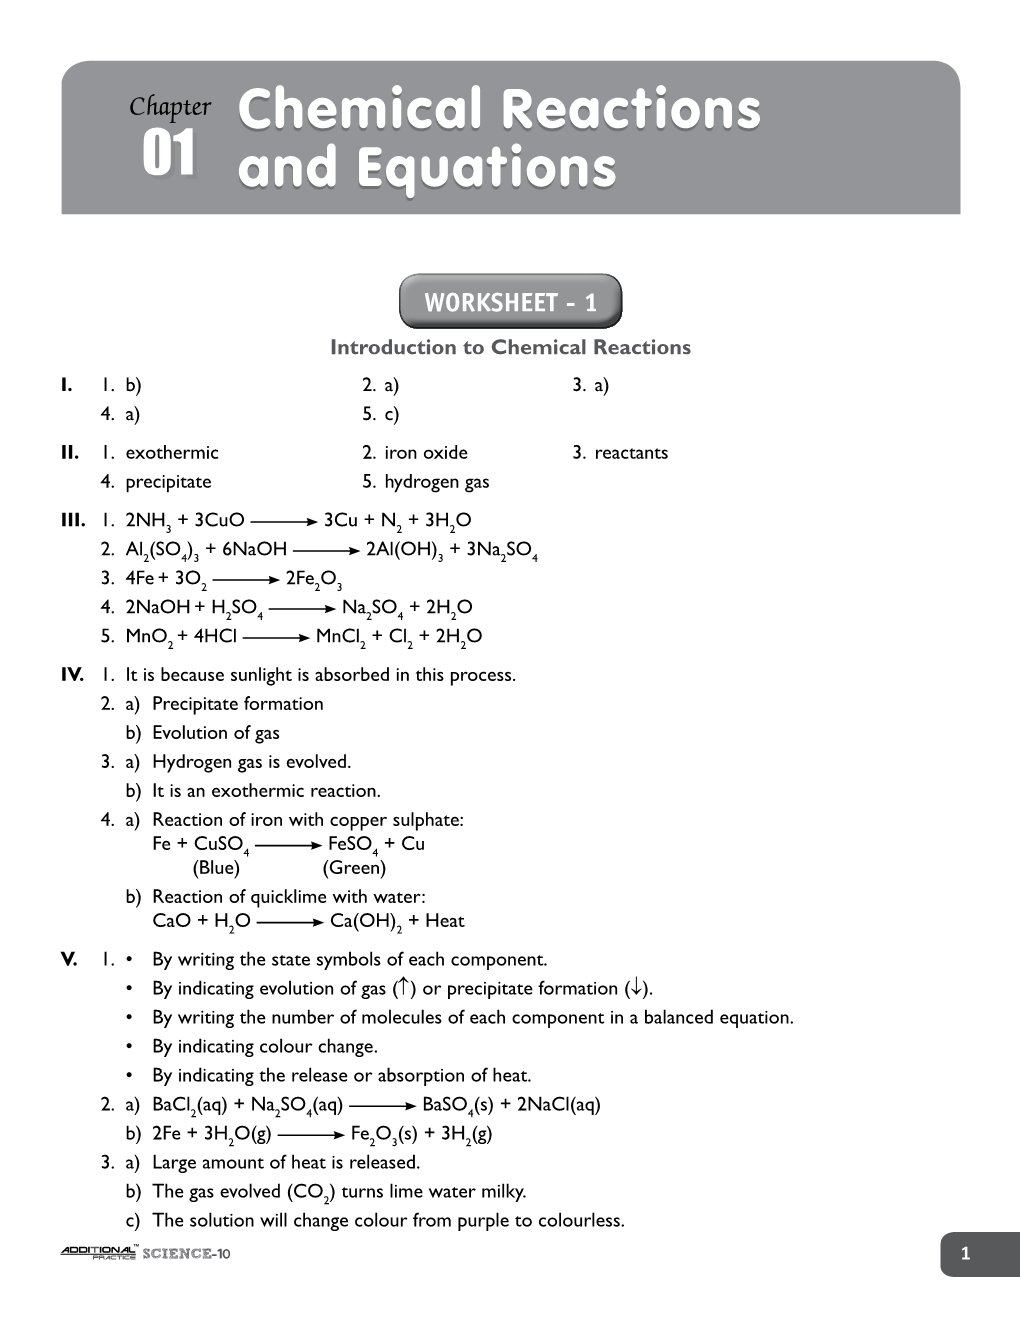 Chemical Reactions and Equations 01